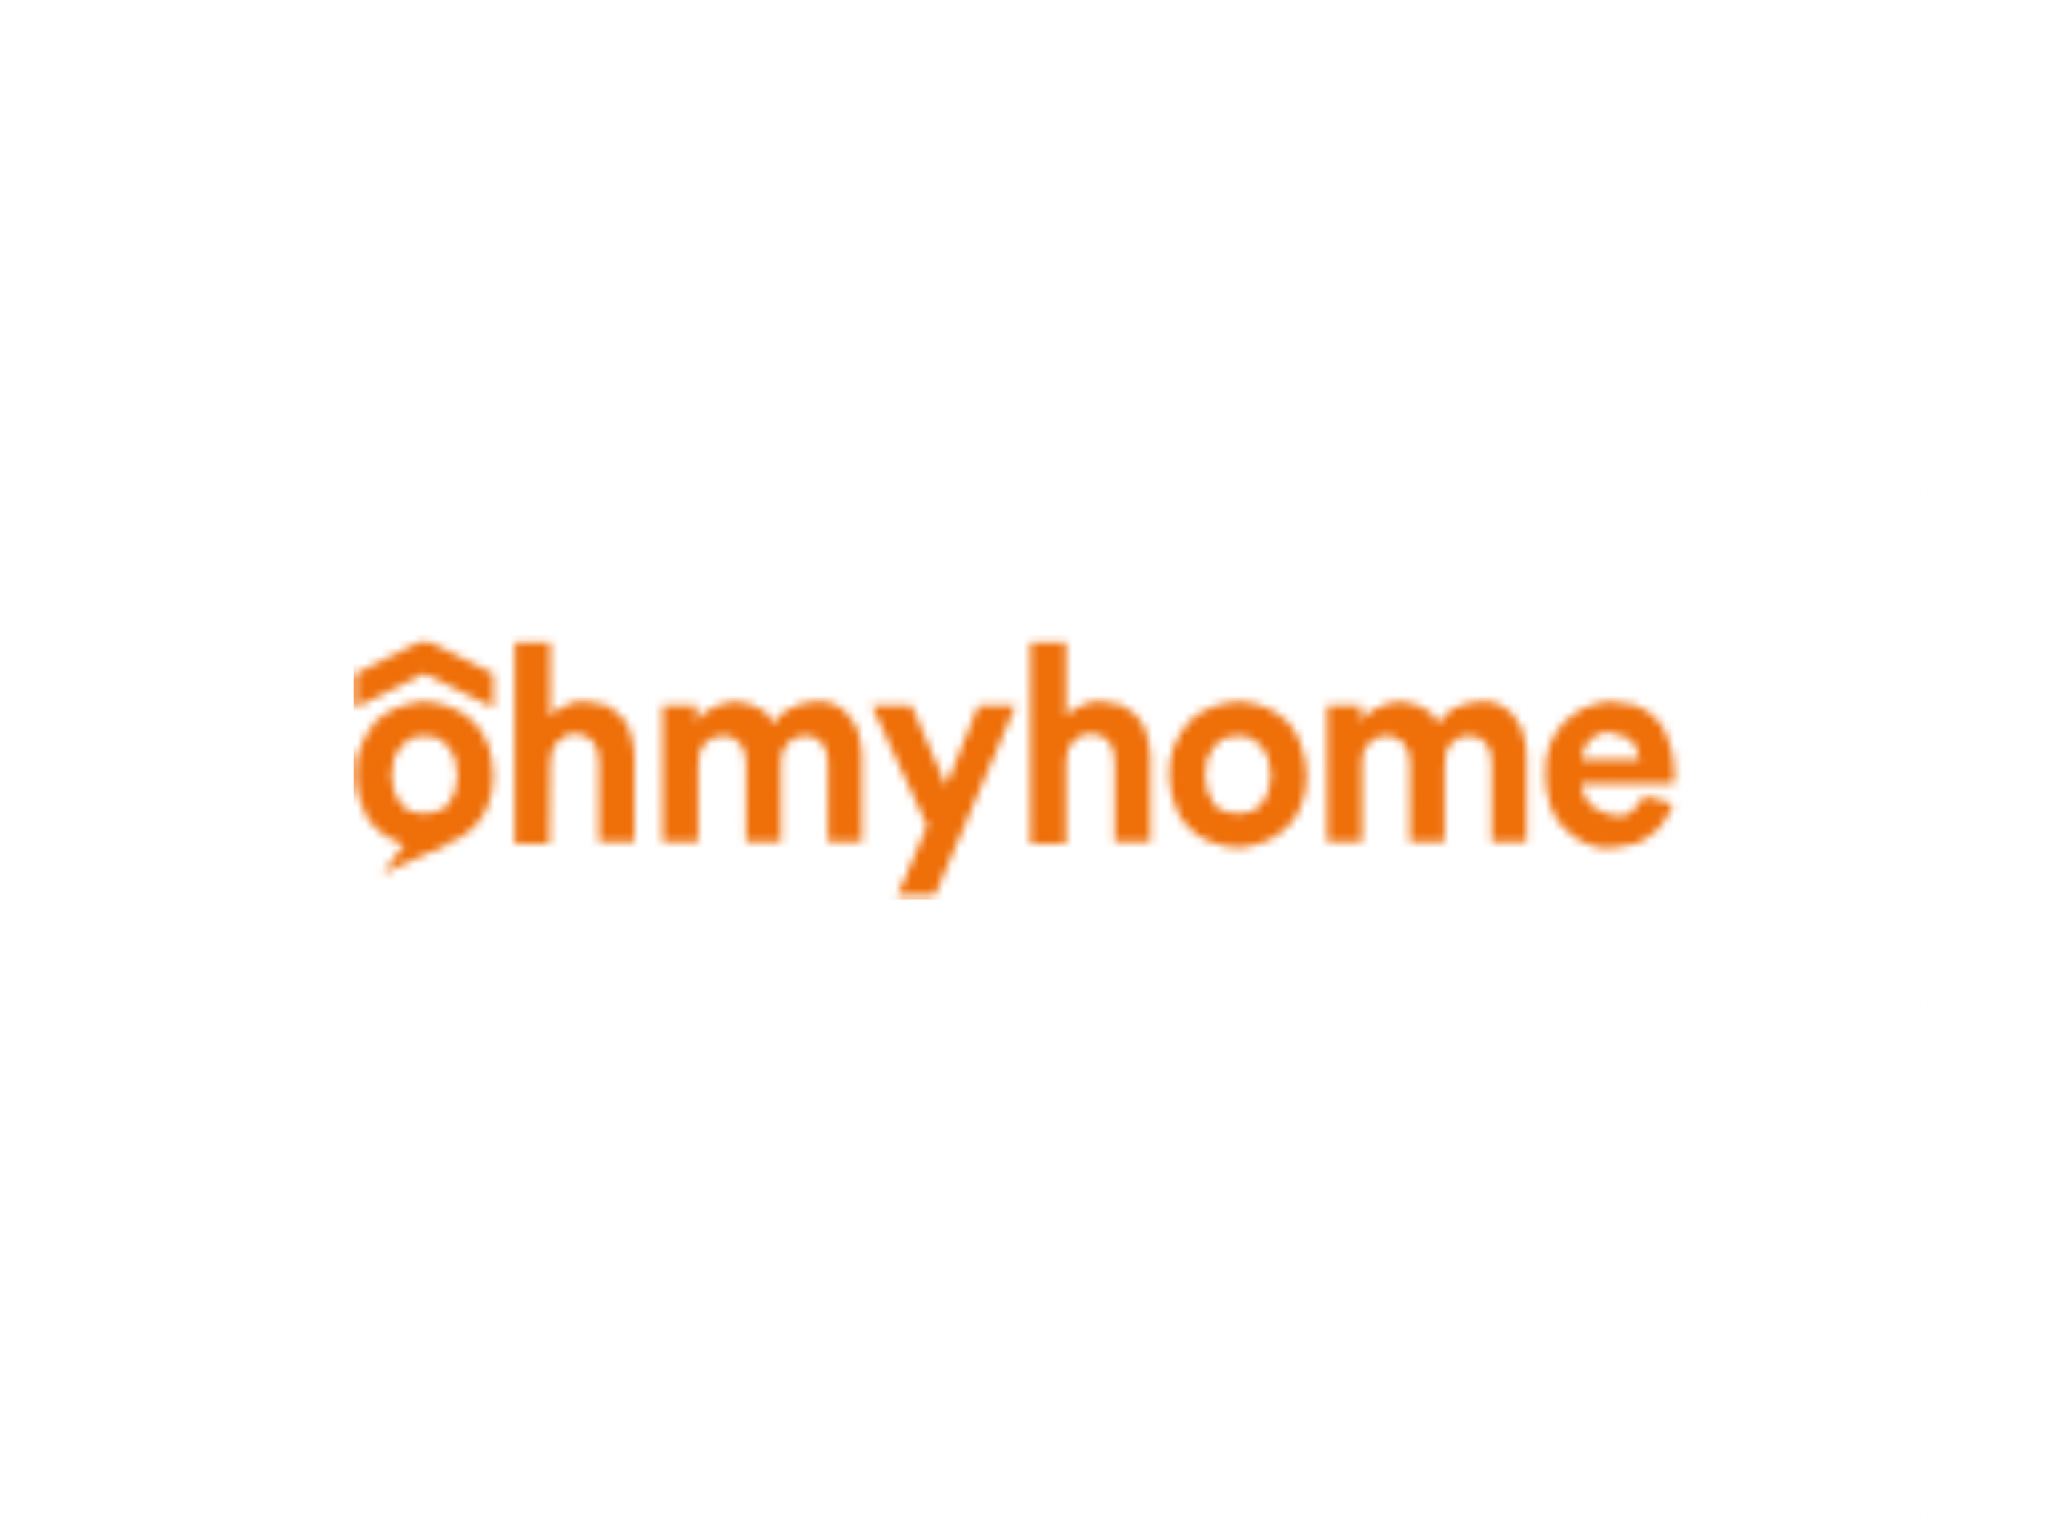  ohmyhome-webuy-forge-partnership-to-elevate-property-and-e-commerce-services-in-singapore 